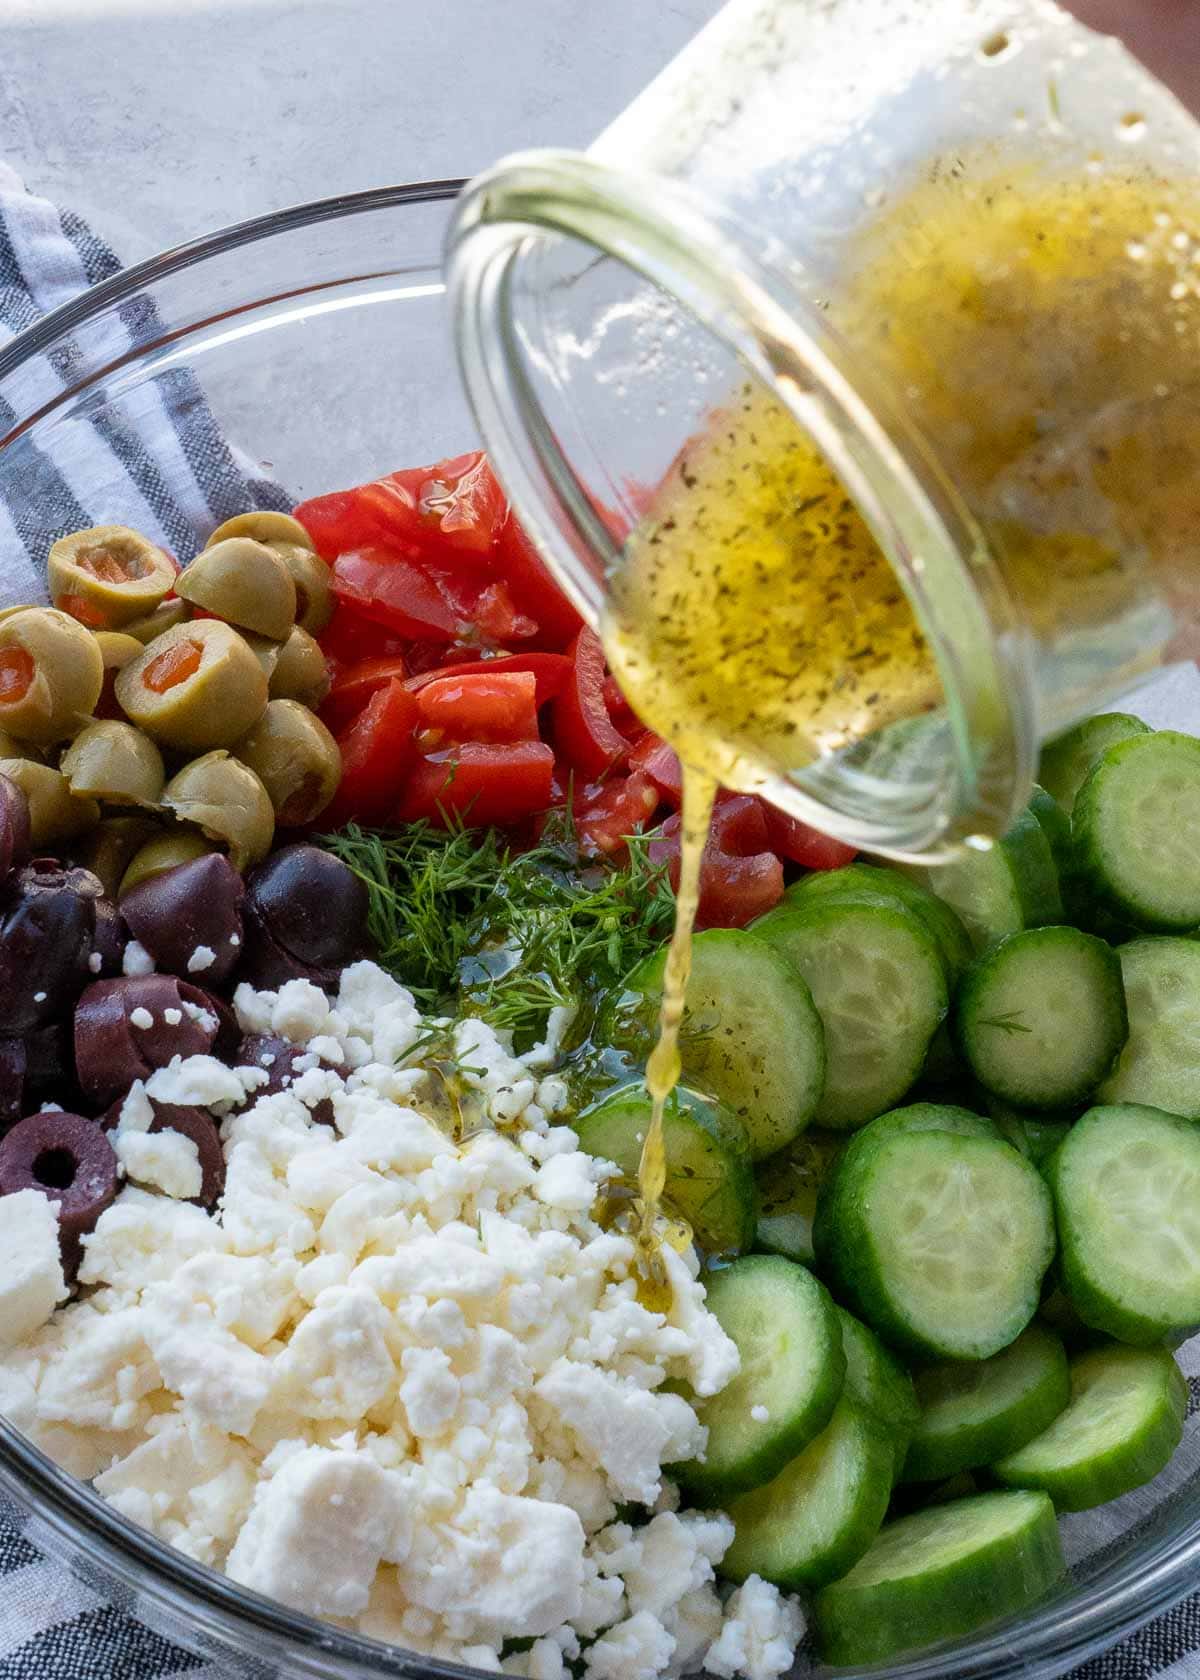 Pouring jar of salad dressing into bowl of cucumbers, feta, olives, and tomatoes